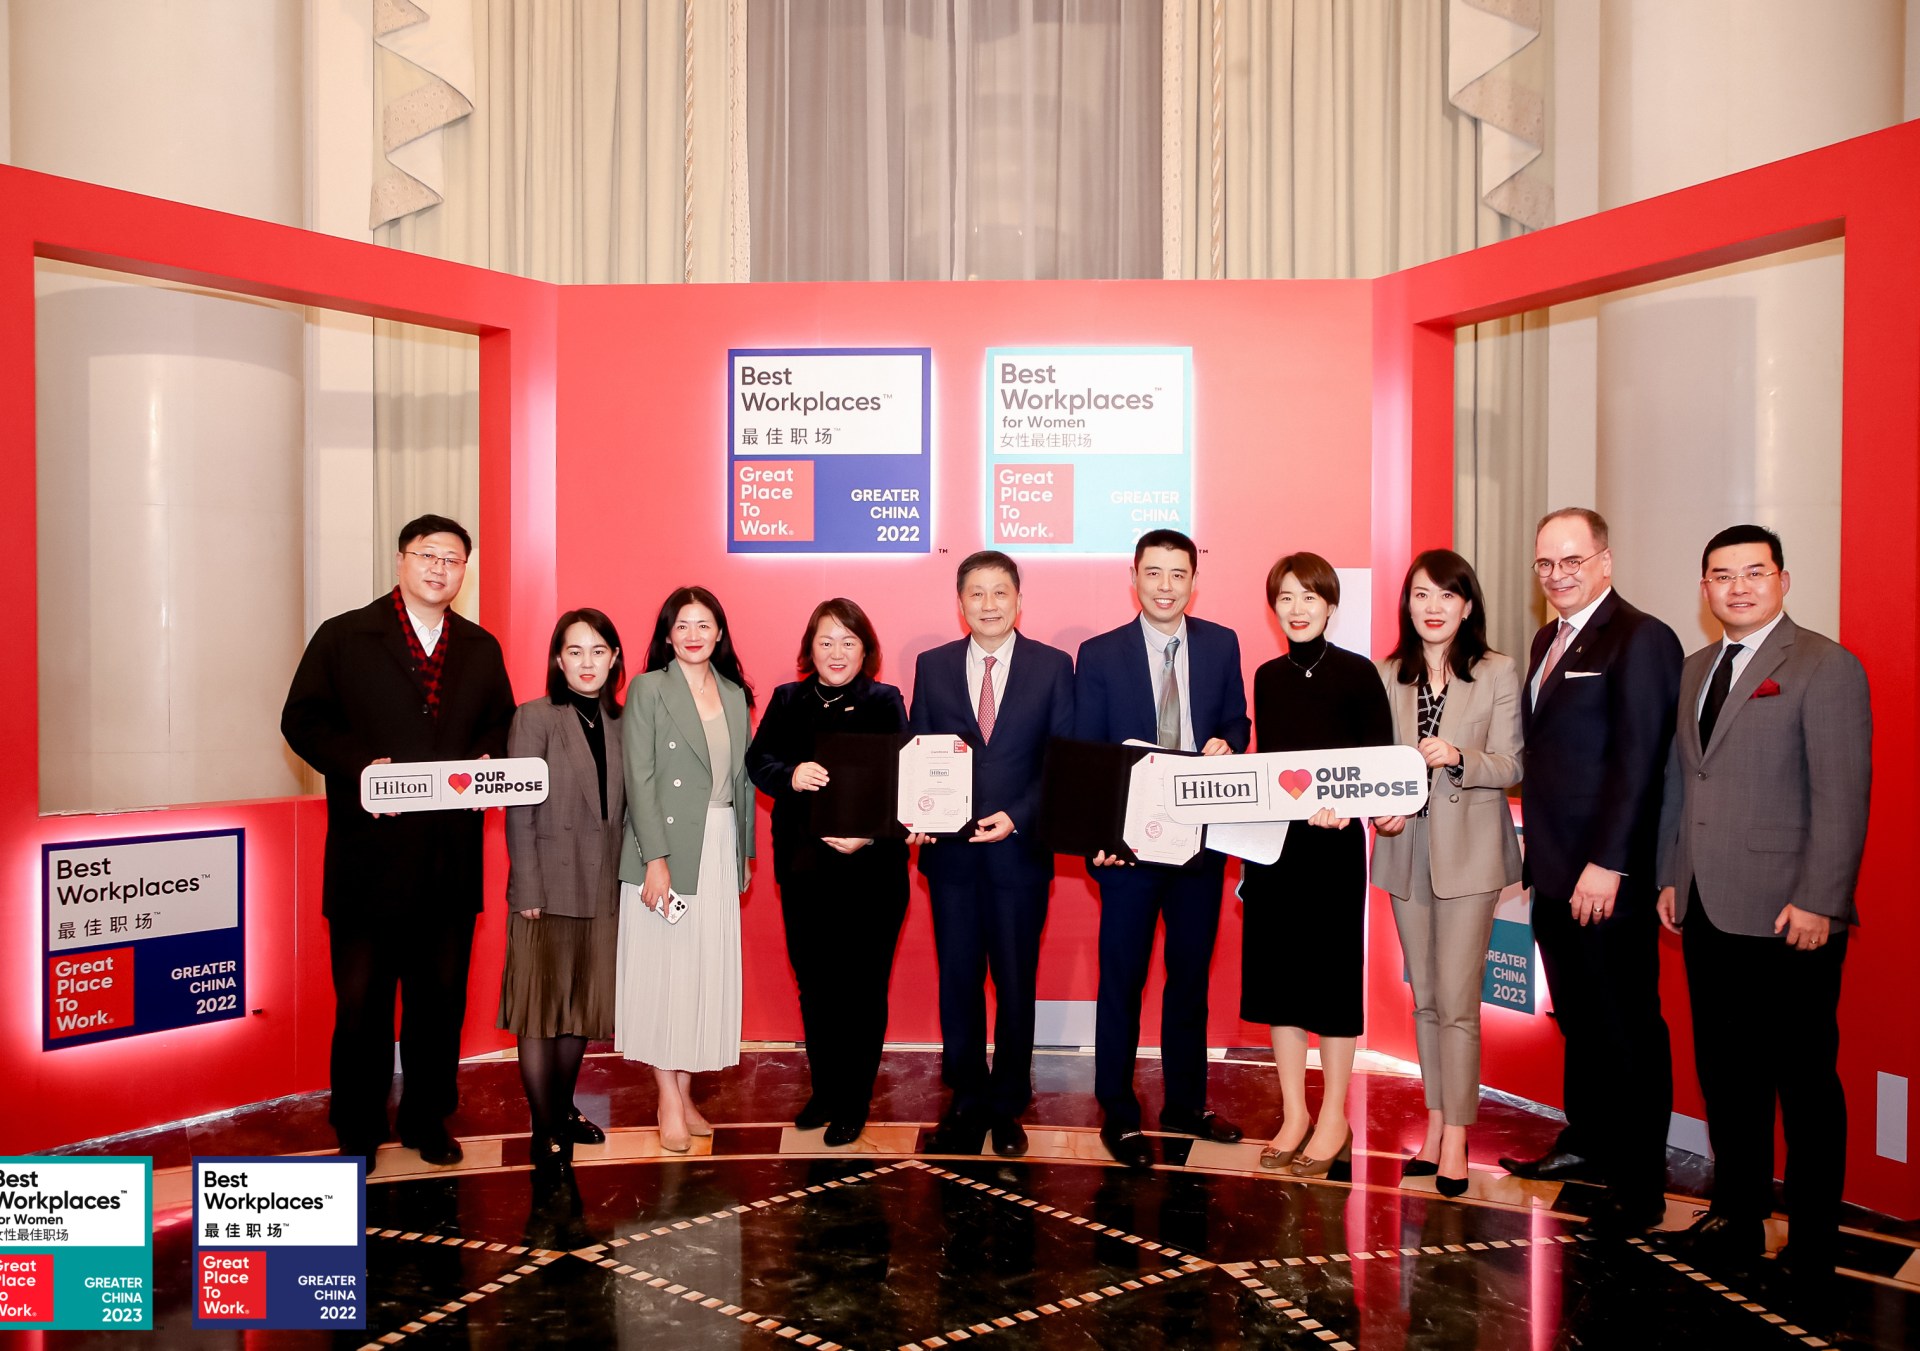 Hilton Named a "Best Workplace in Greater China" for 8 Years in a Row